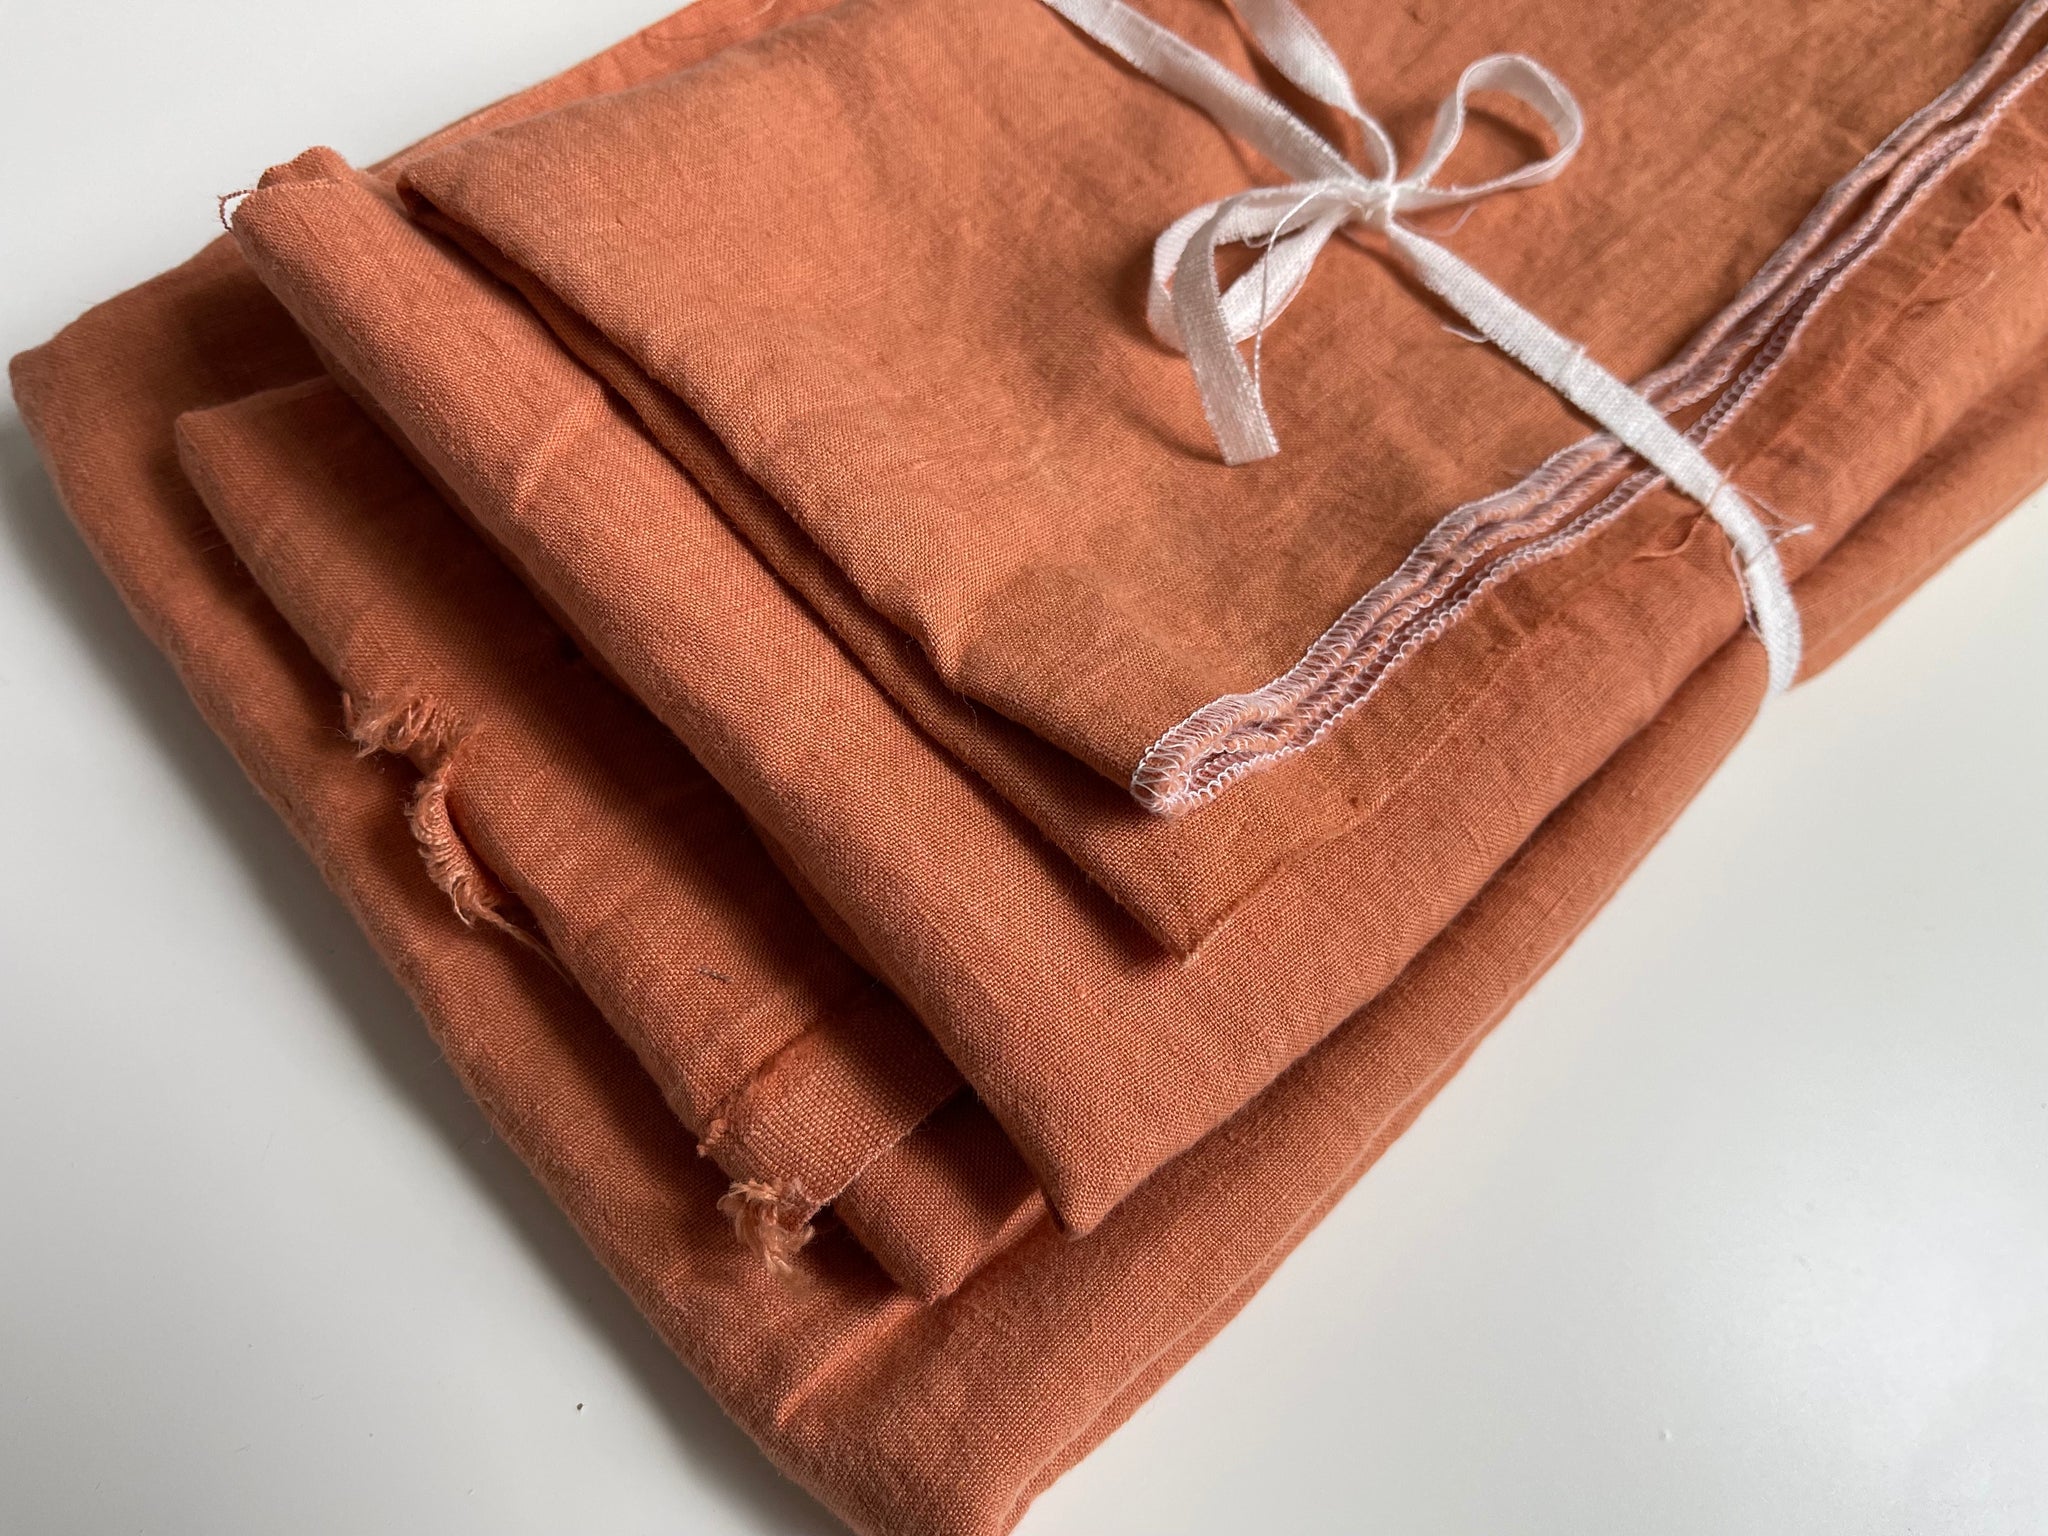 Linen Fabric Remnants - Imperfect Terracotta - about 2.5 yards